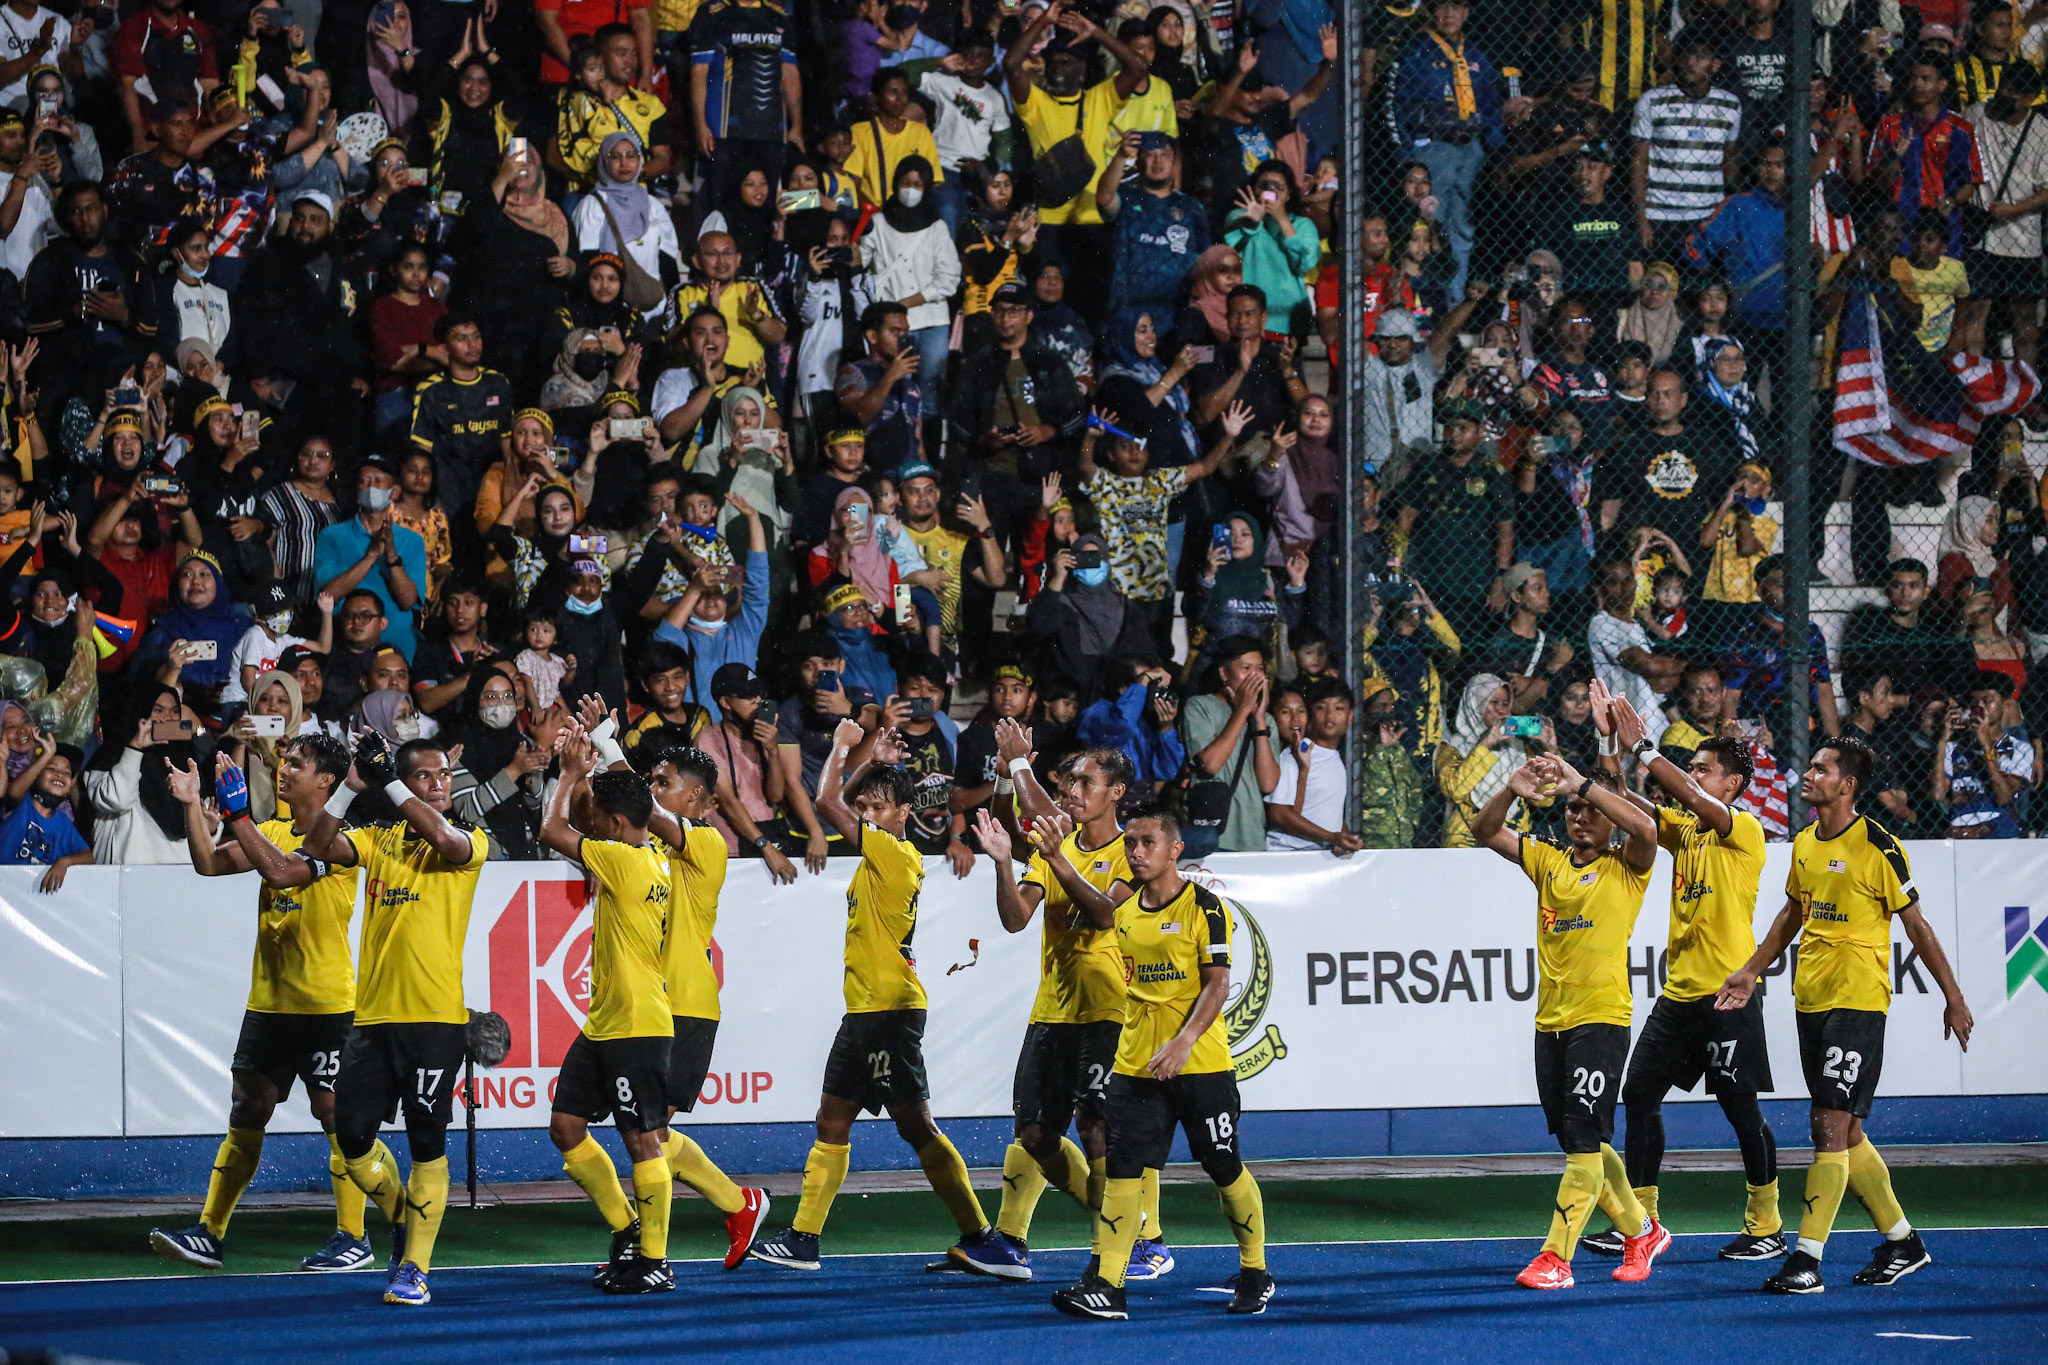 Victory lap by the Malaysian team honouring the fans